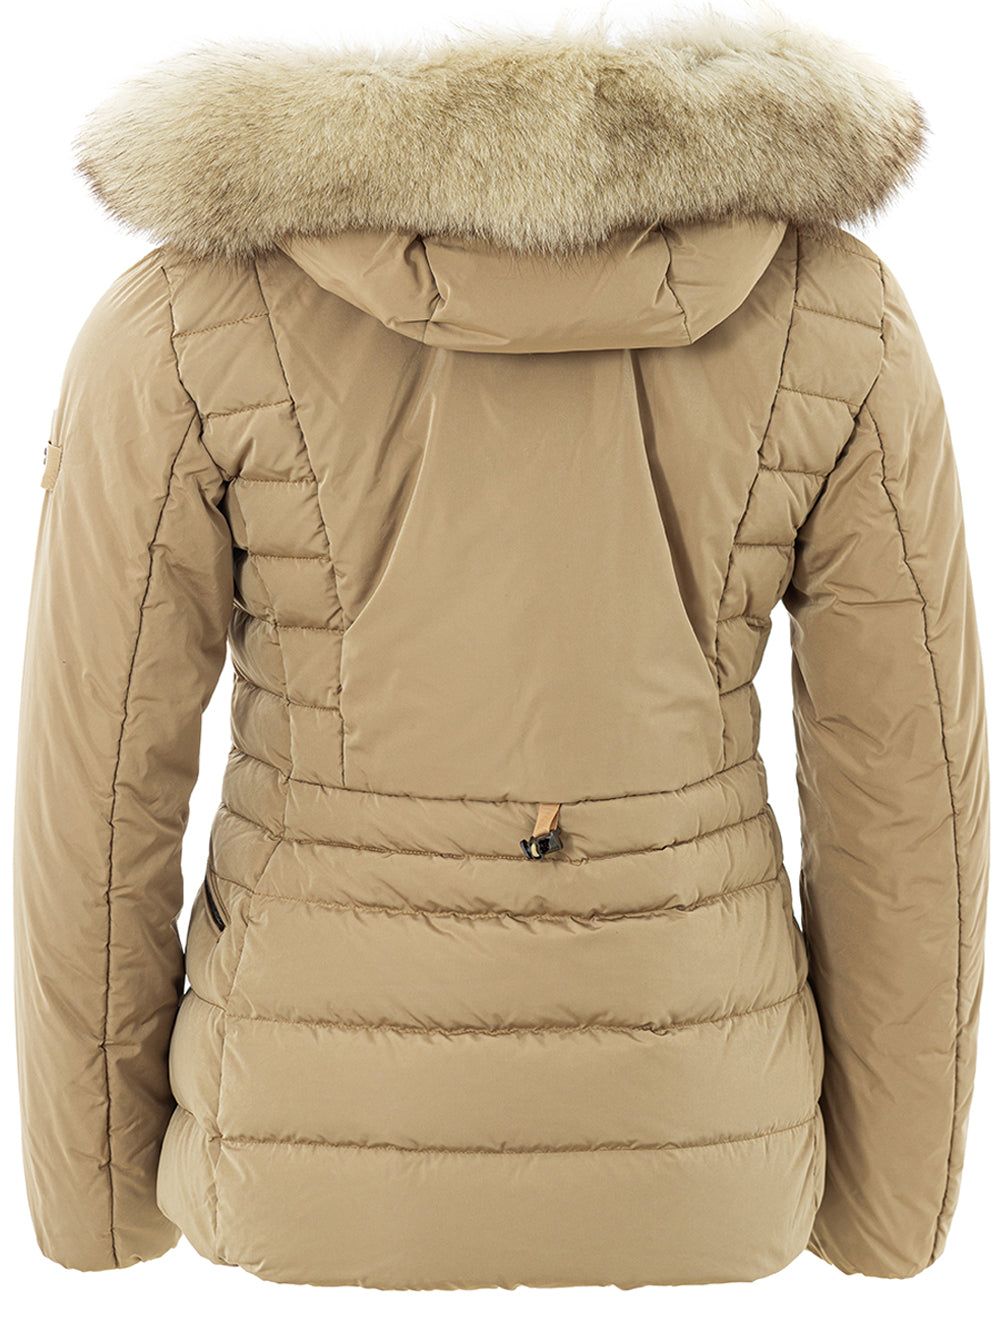 Beige Padded Jacket with Fur Collar Peuterey